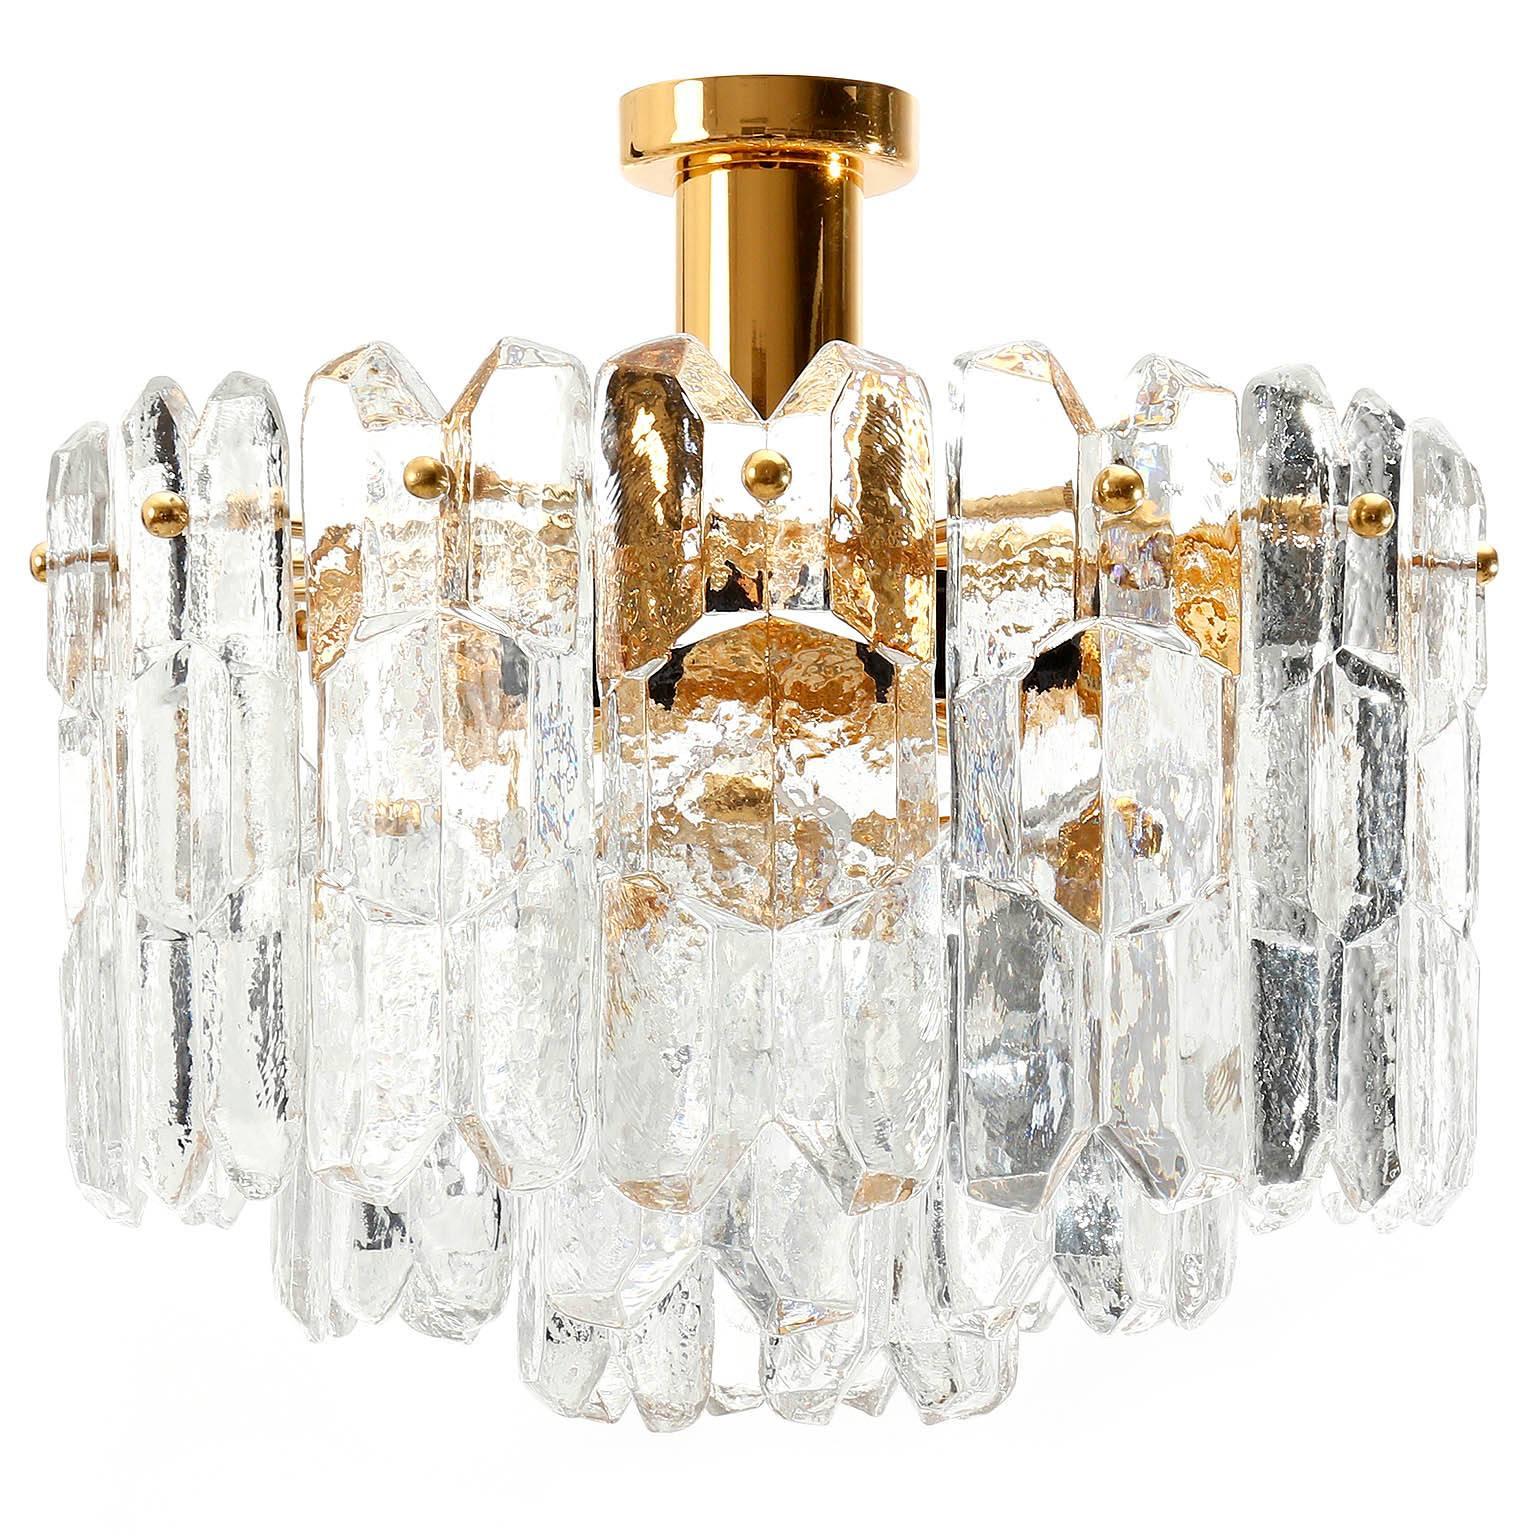 One of three exquisit 24-carat gold-plated brass and clear brillant glass 'Palazzo' flush mount lights by J.T. Kalmar, Vienna, Austria, manufactured in circa 1970 (late 1960s and early 1970s). Labeled.
These lights are handmade and high quality